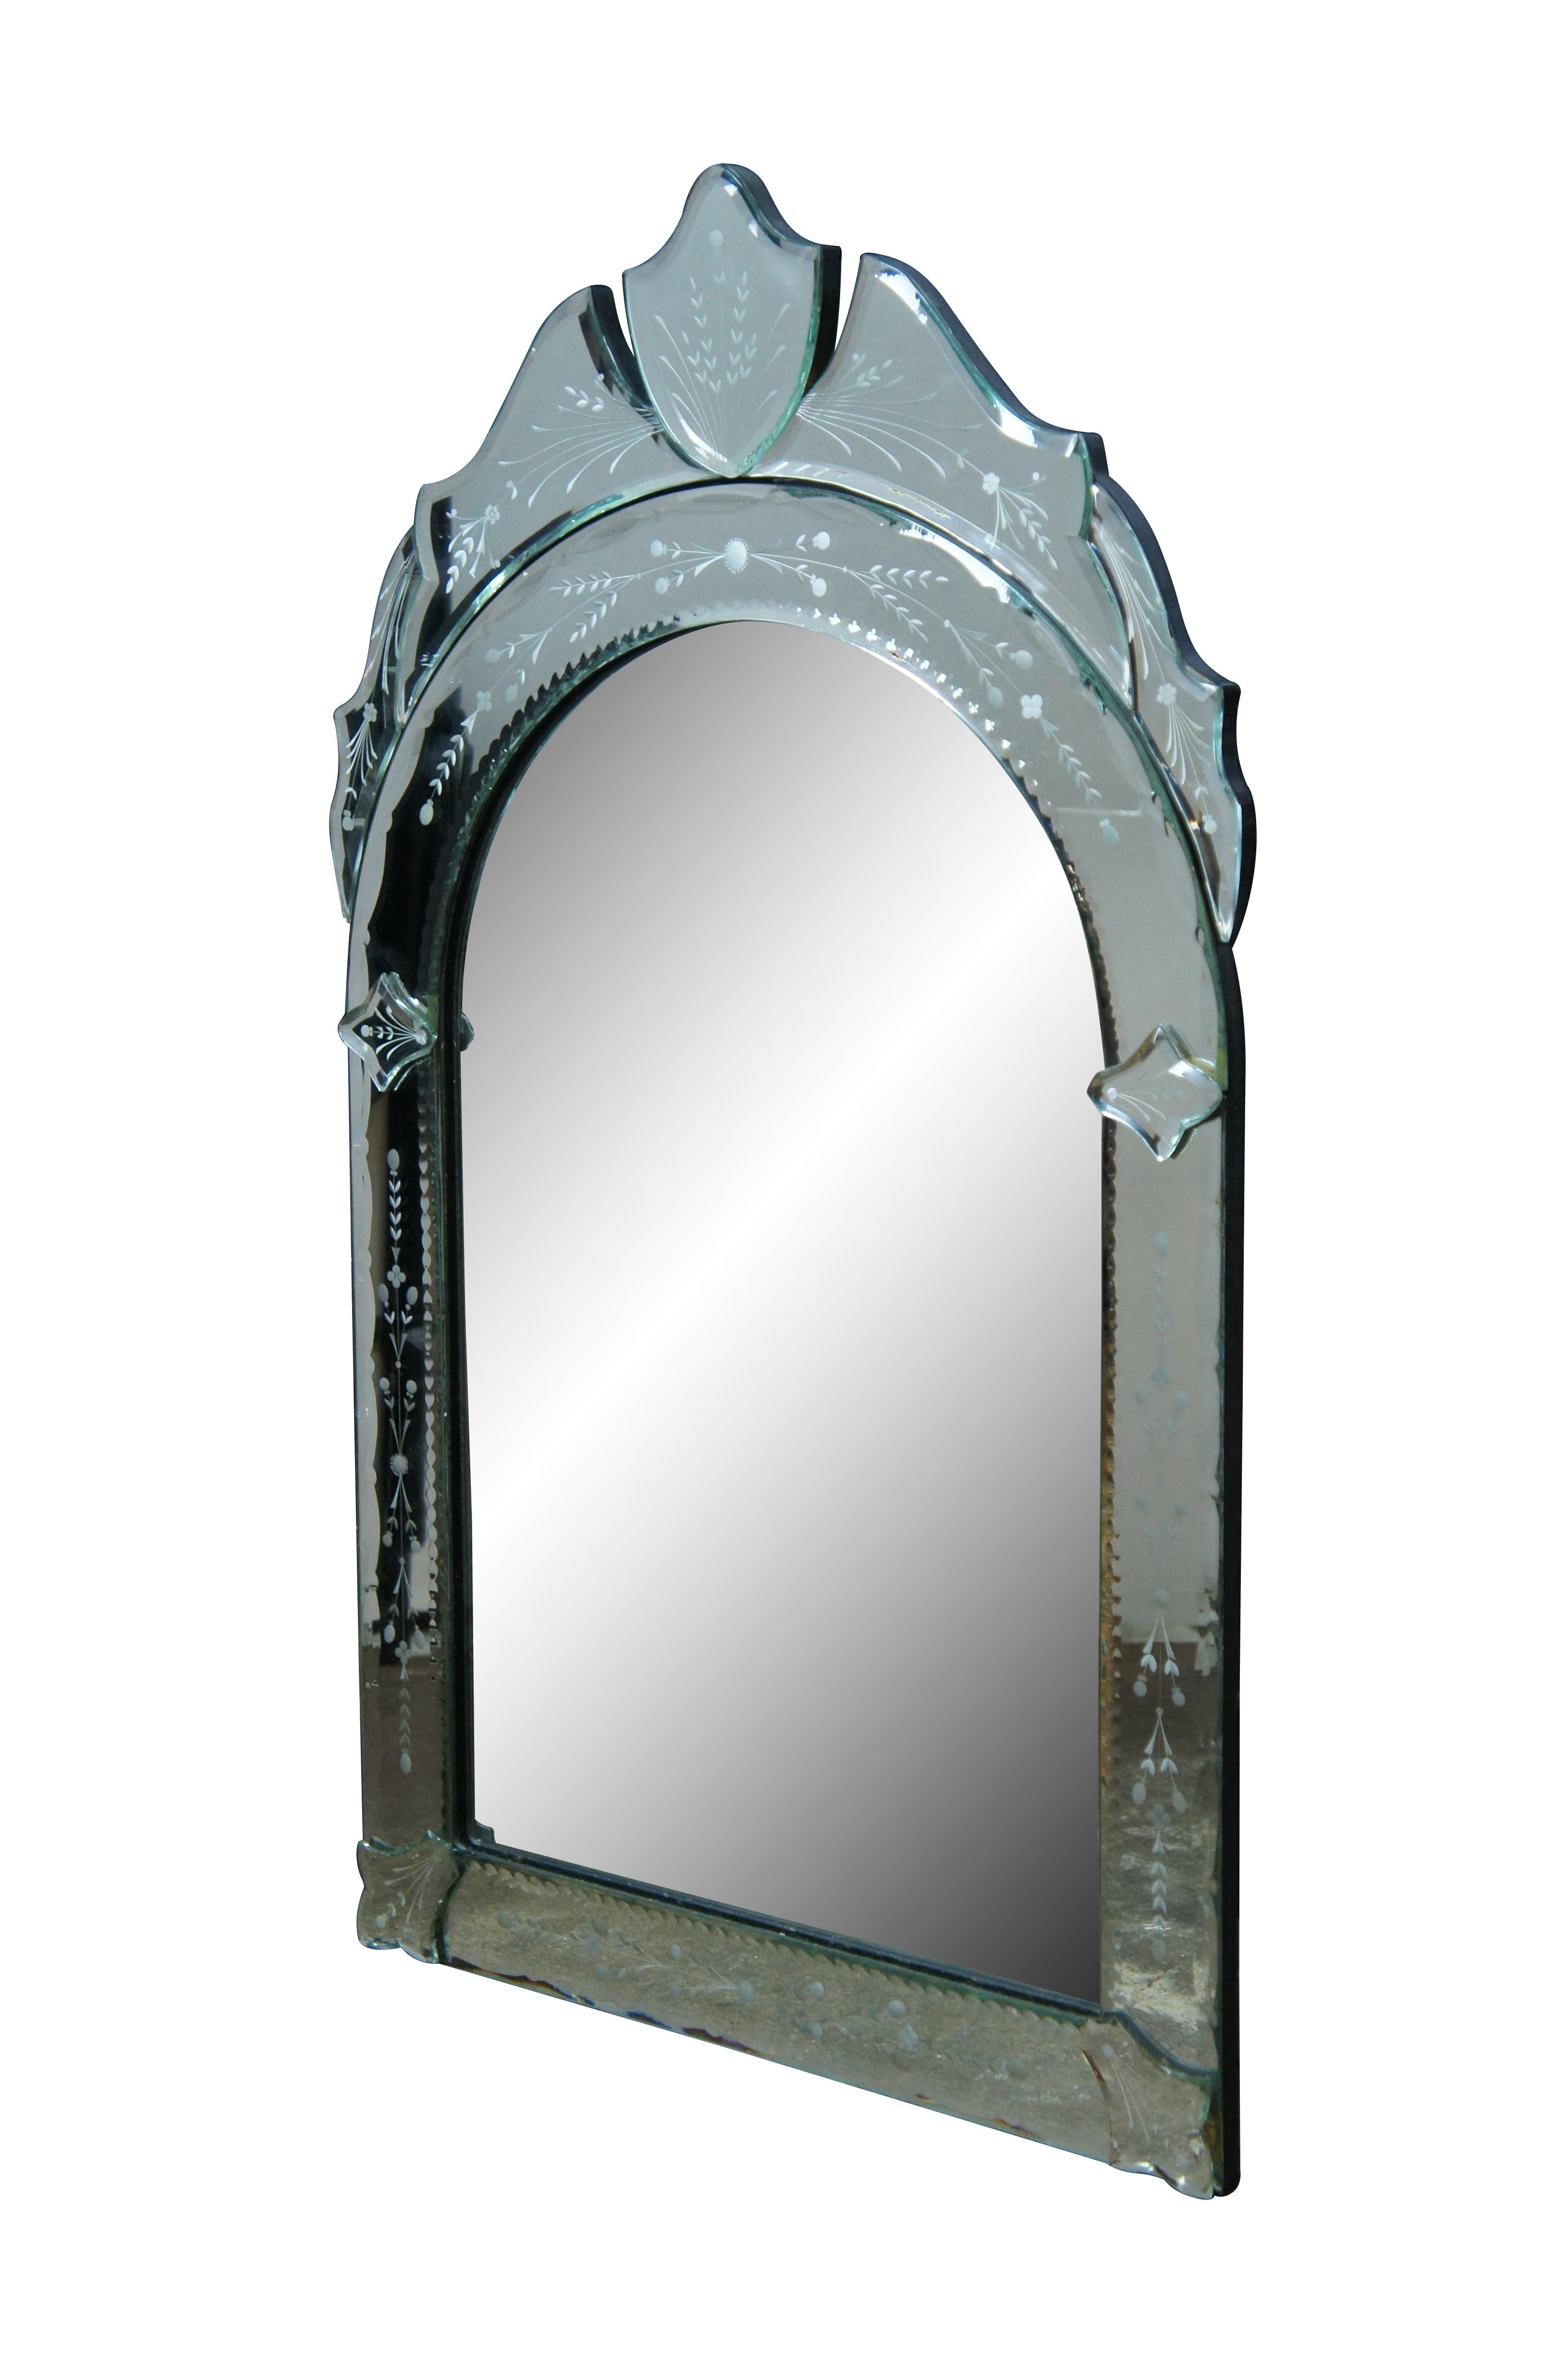 Late 20th century floral etched wall mirror. Arched Hollywood Regency design with molded panel crest and a reverse etched design of sprigs of leaves and flowers. Made in Philippines. 

Dimensions:
18.75